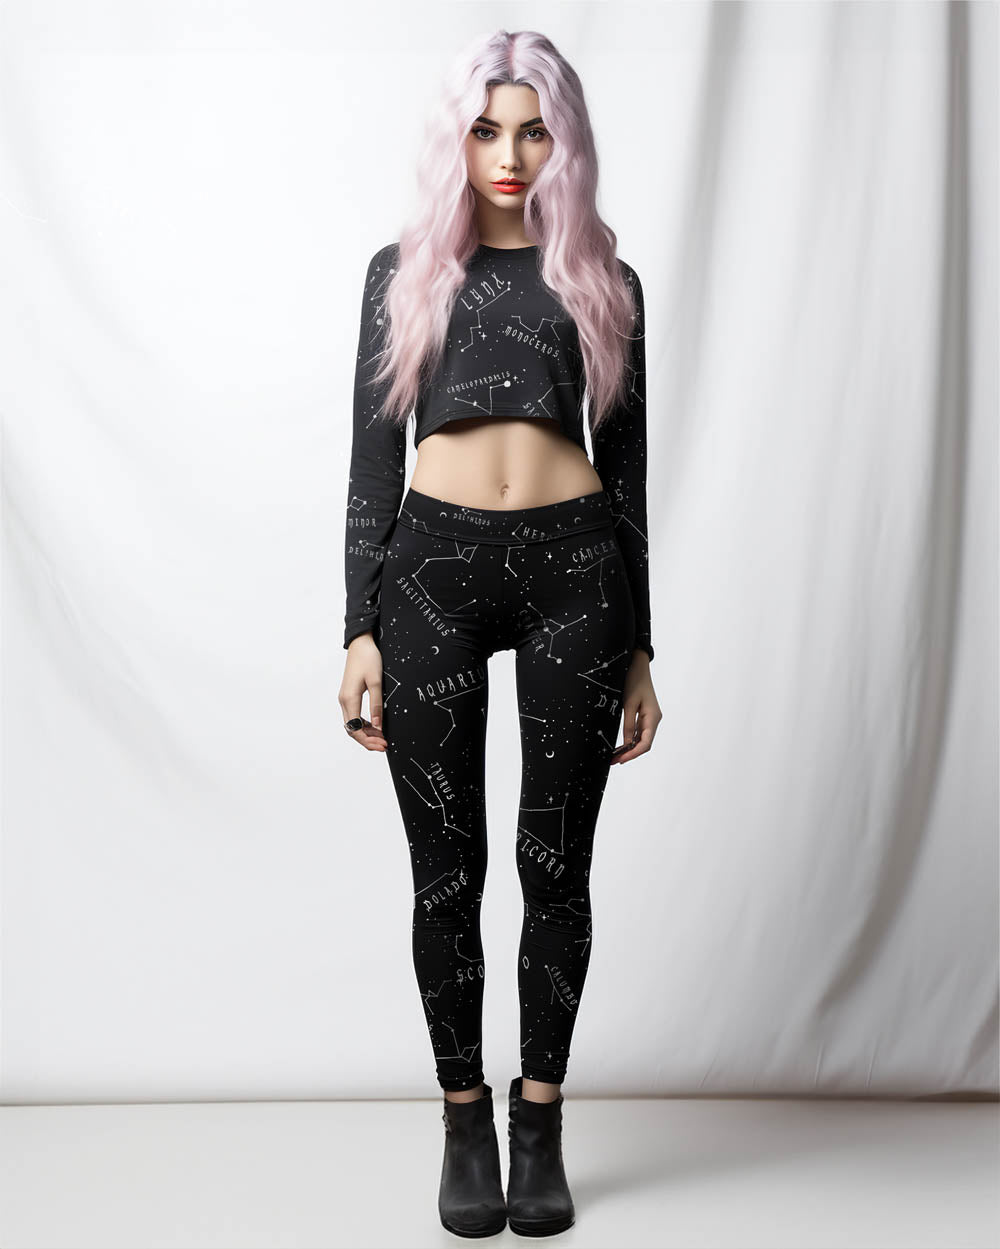 Year of Ours Starr Leggings - Charcoal - Safe & Chic